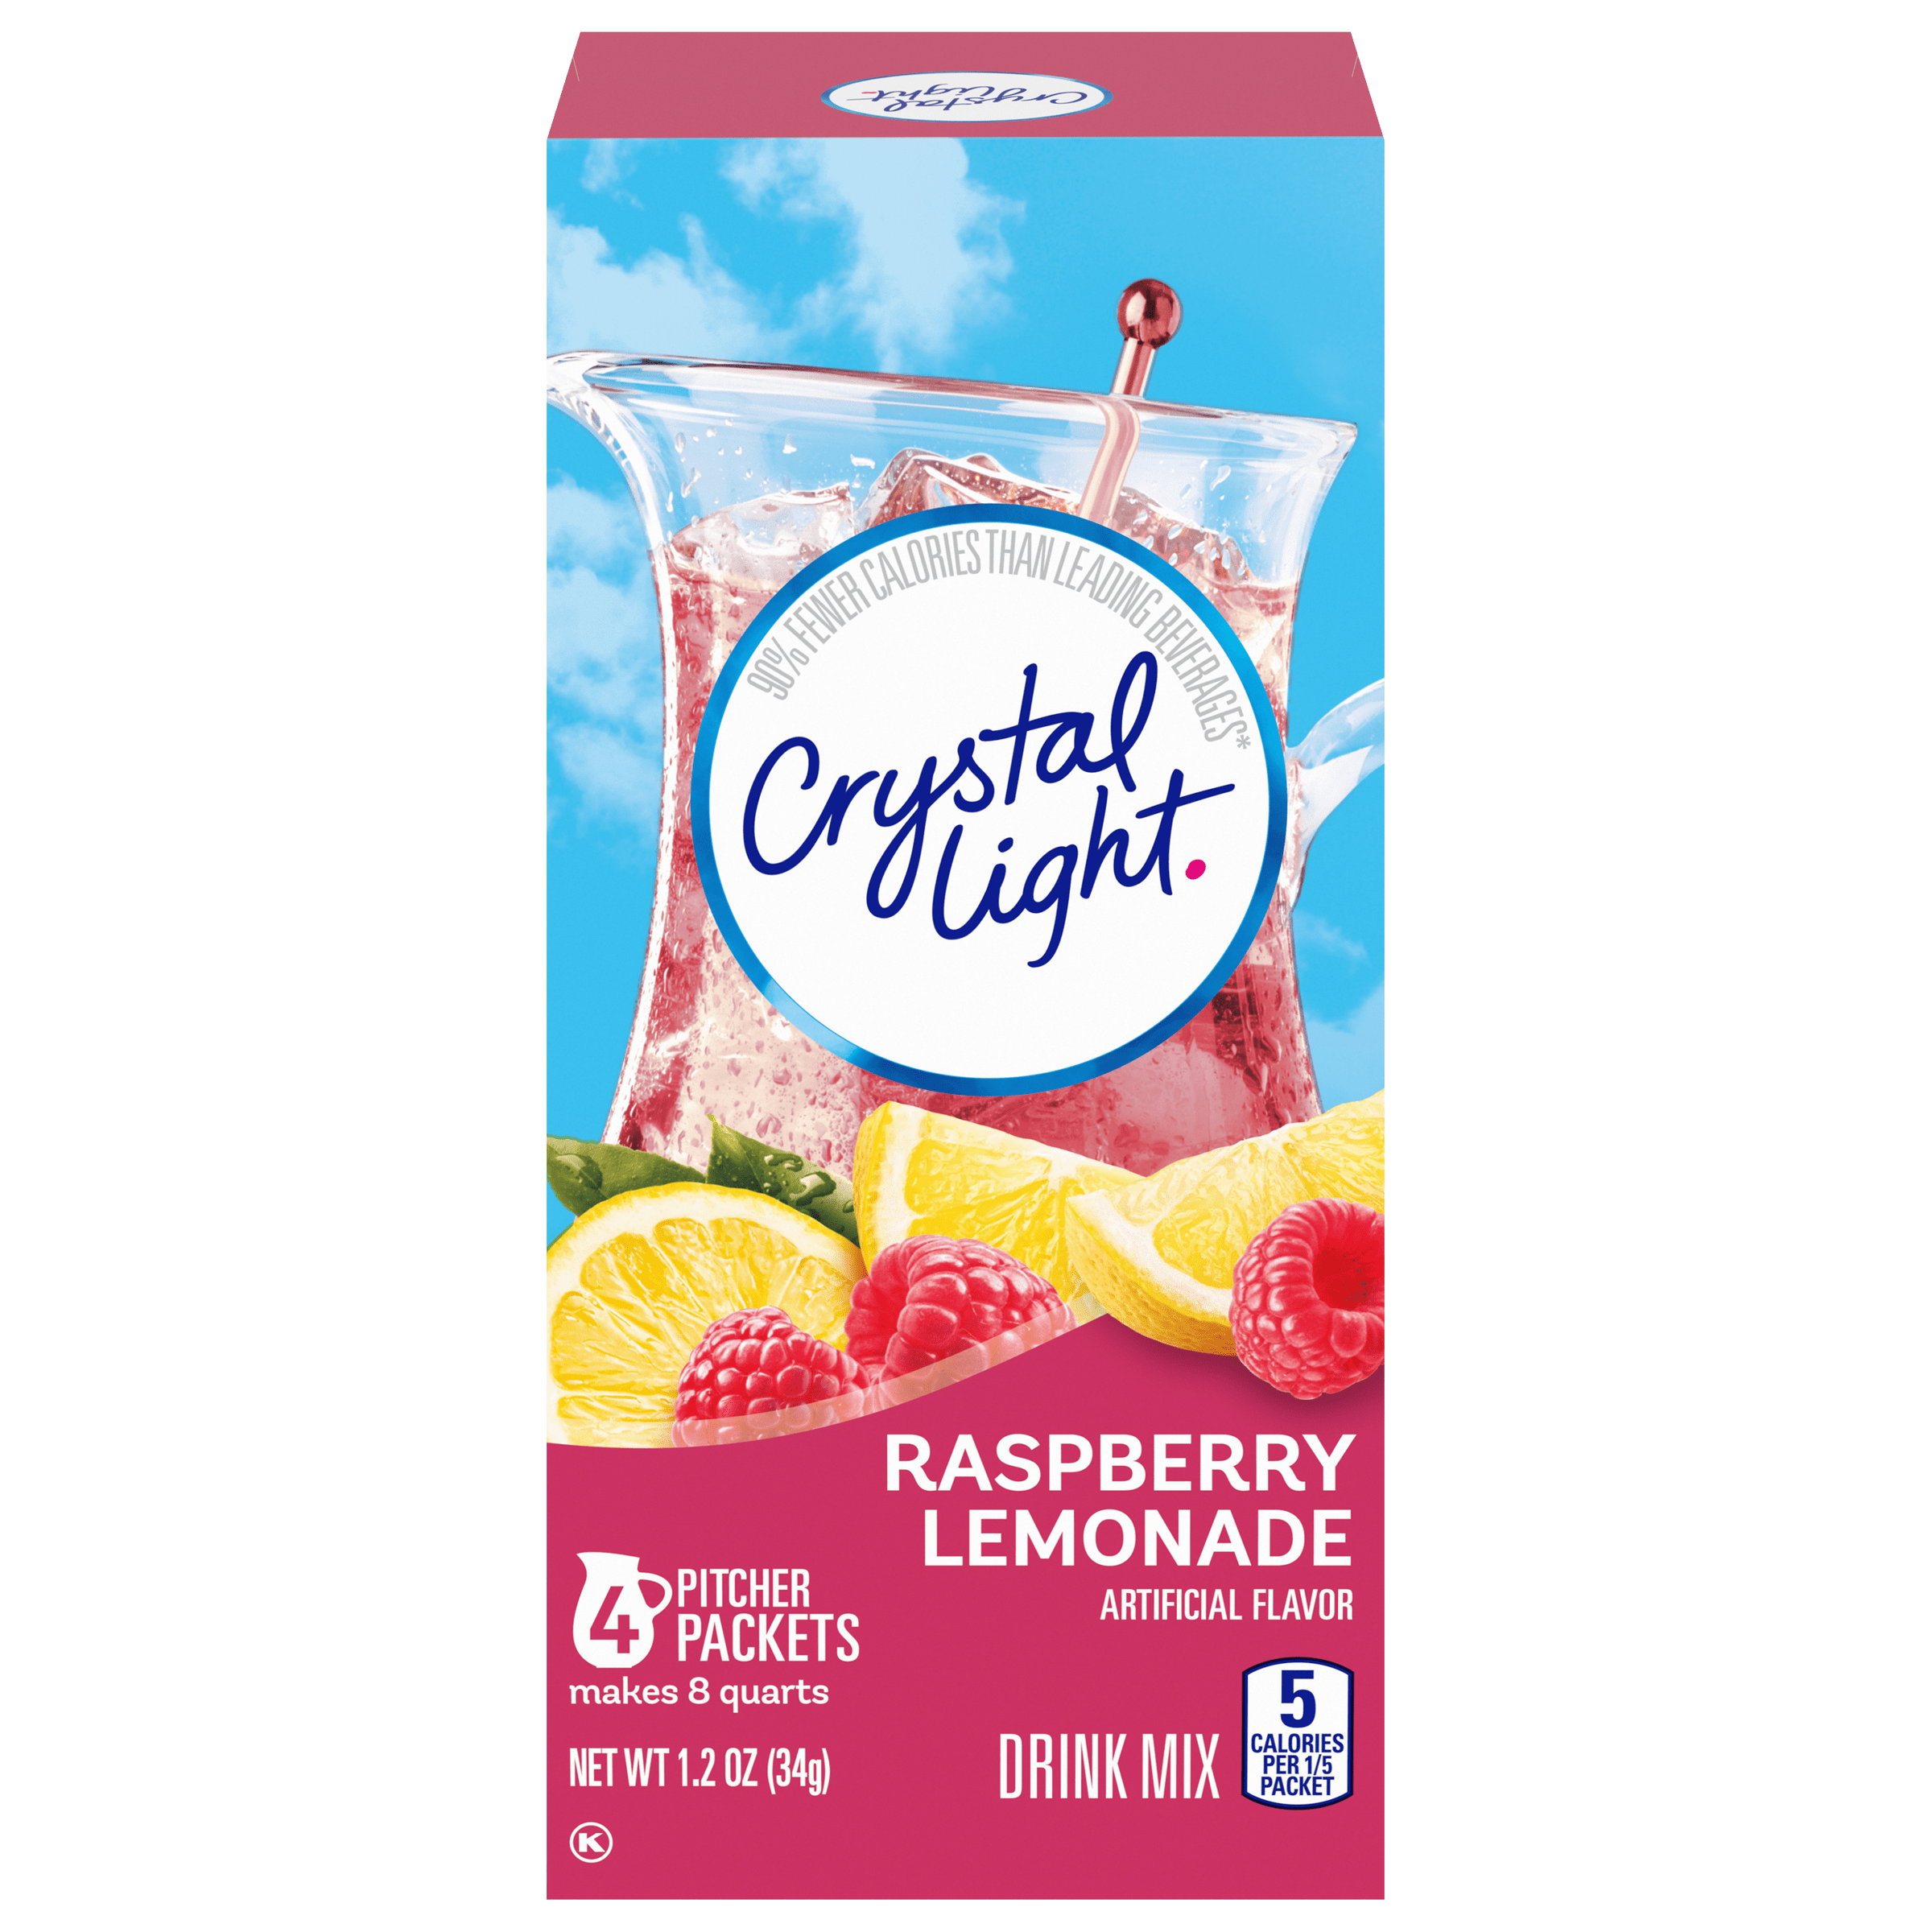 Raspberry Lemonade Artificially Flavored Powdered Drink Mix